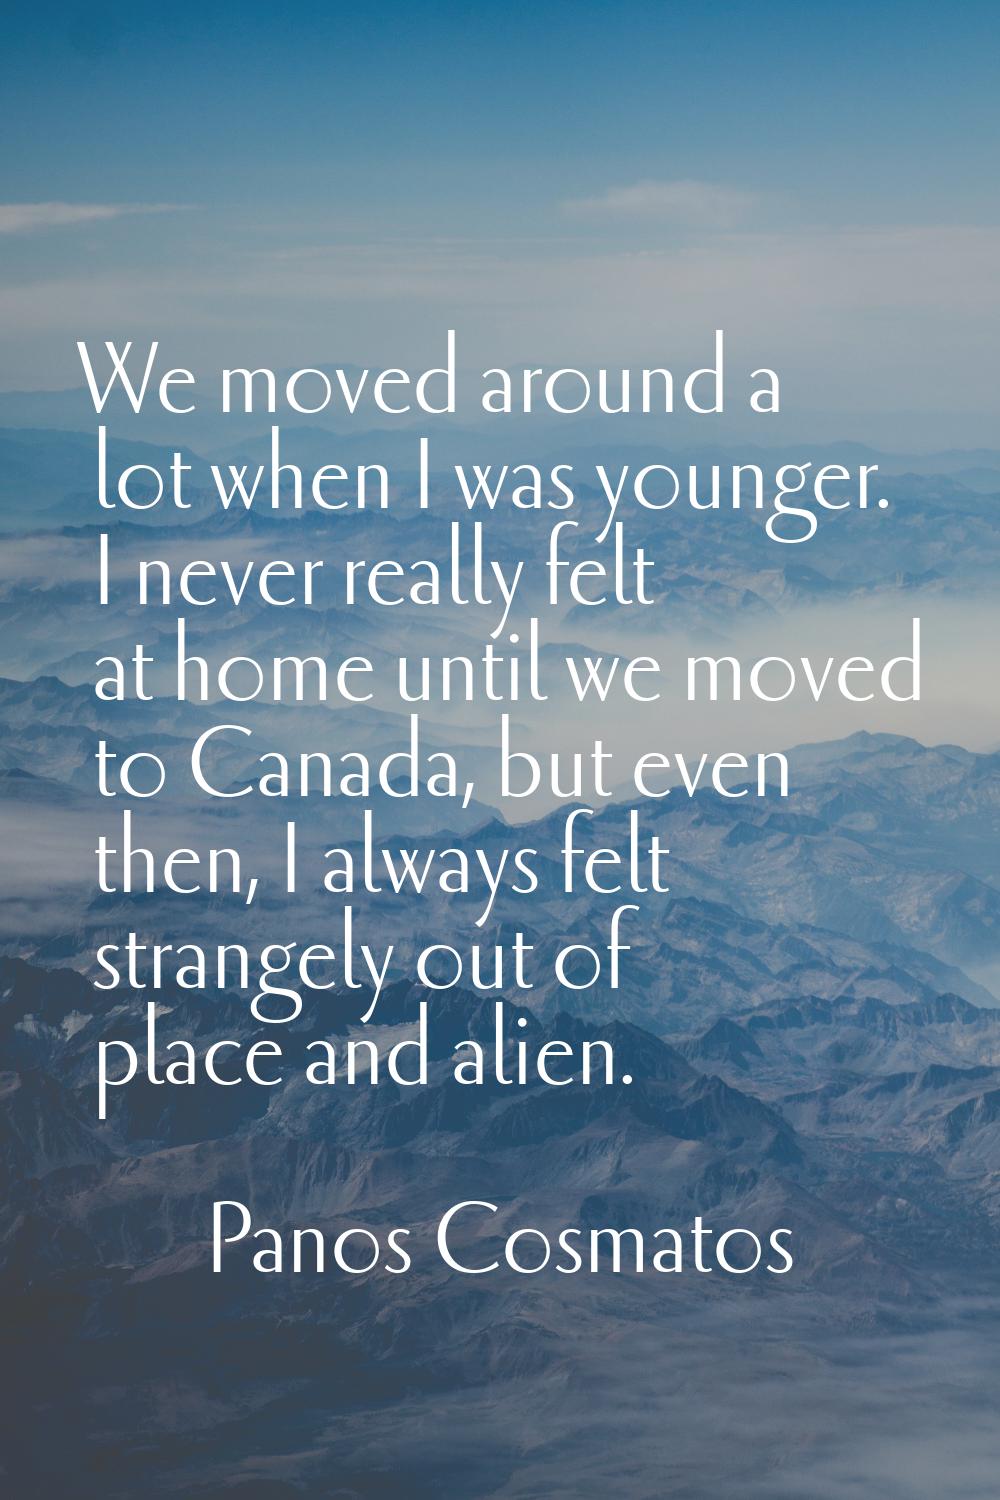 We moved around a lot when I was younger. I never really felt at home until we moved to Canada, but